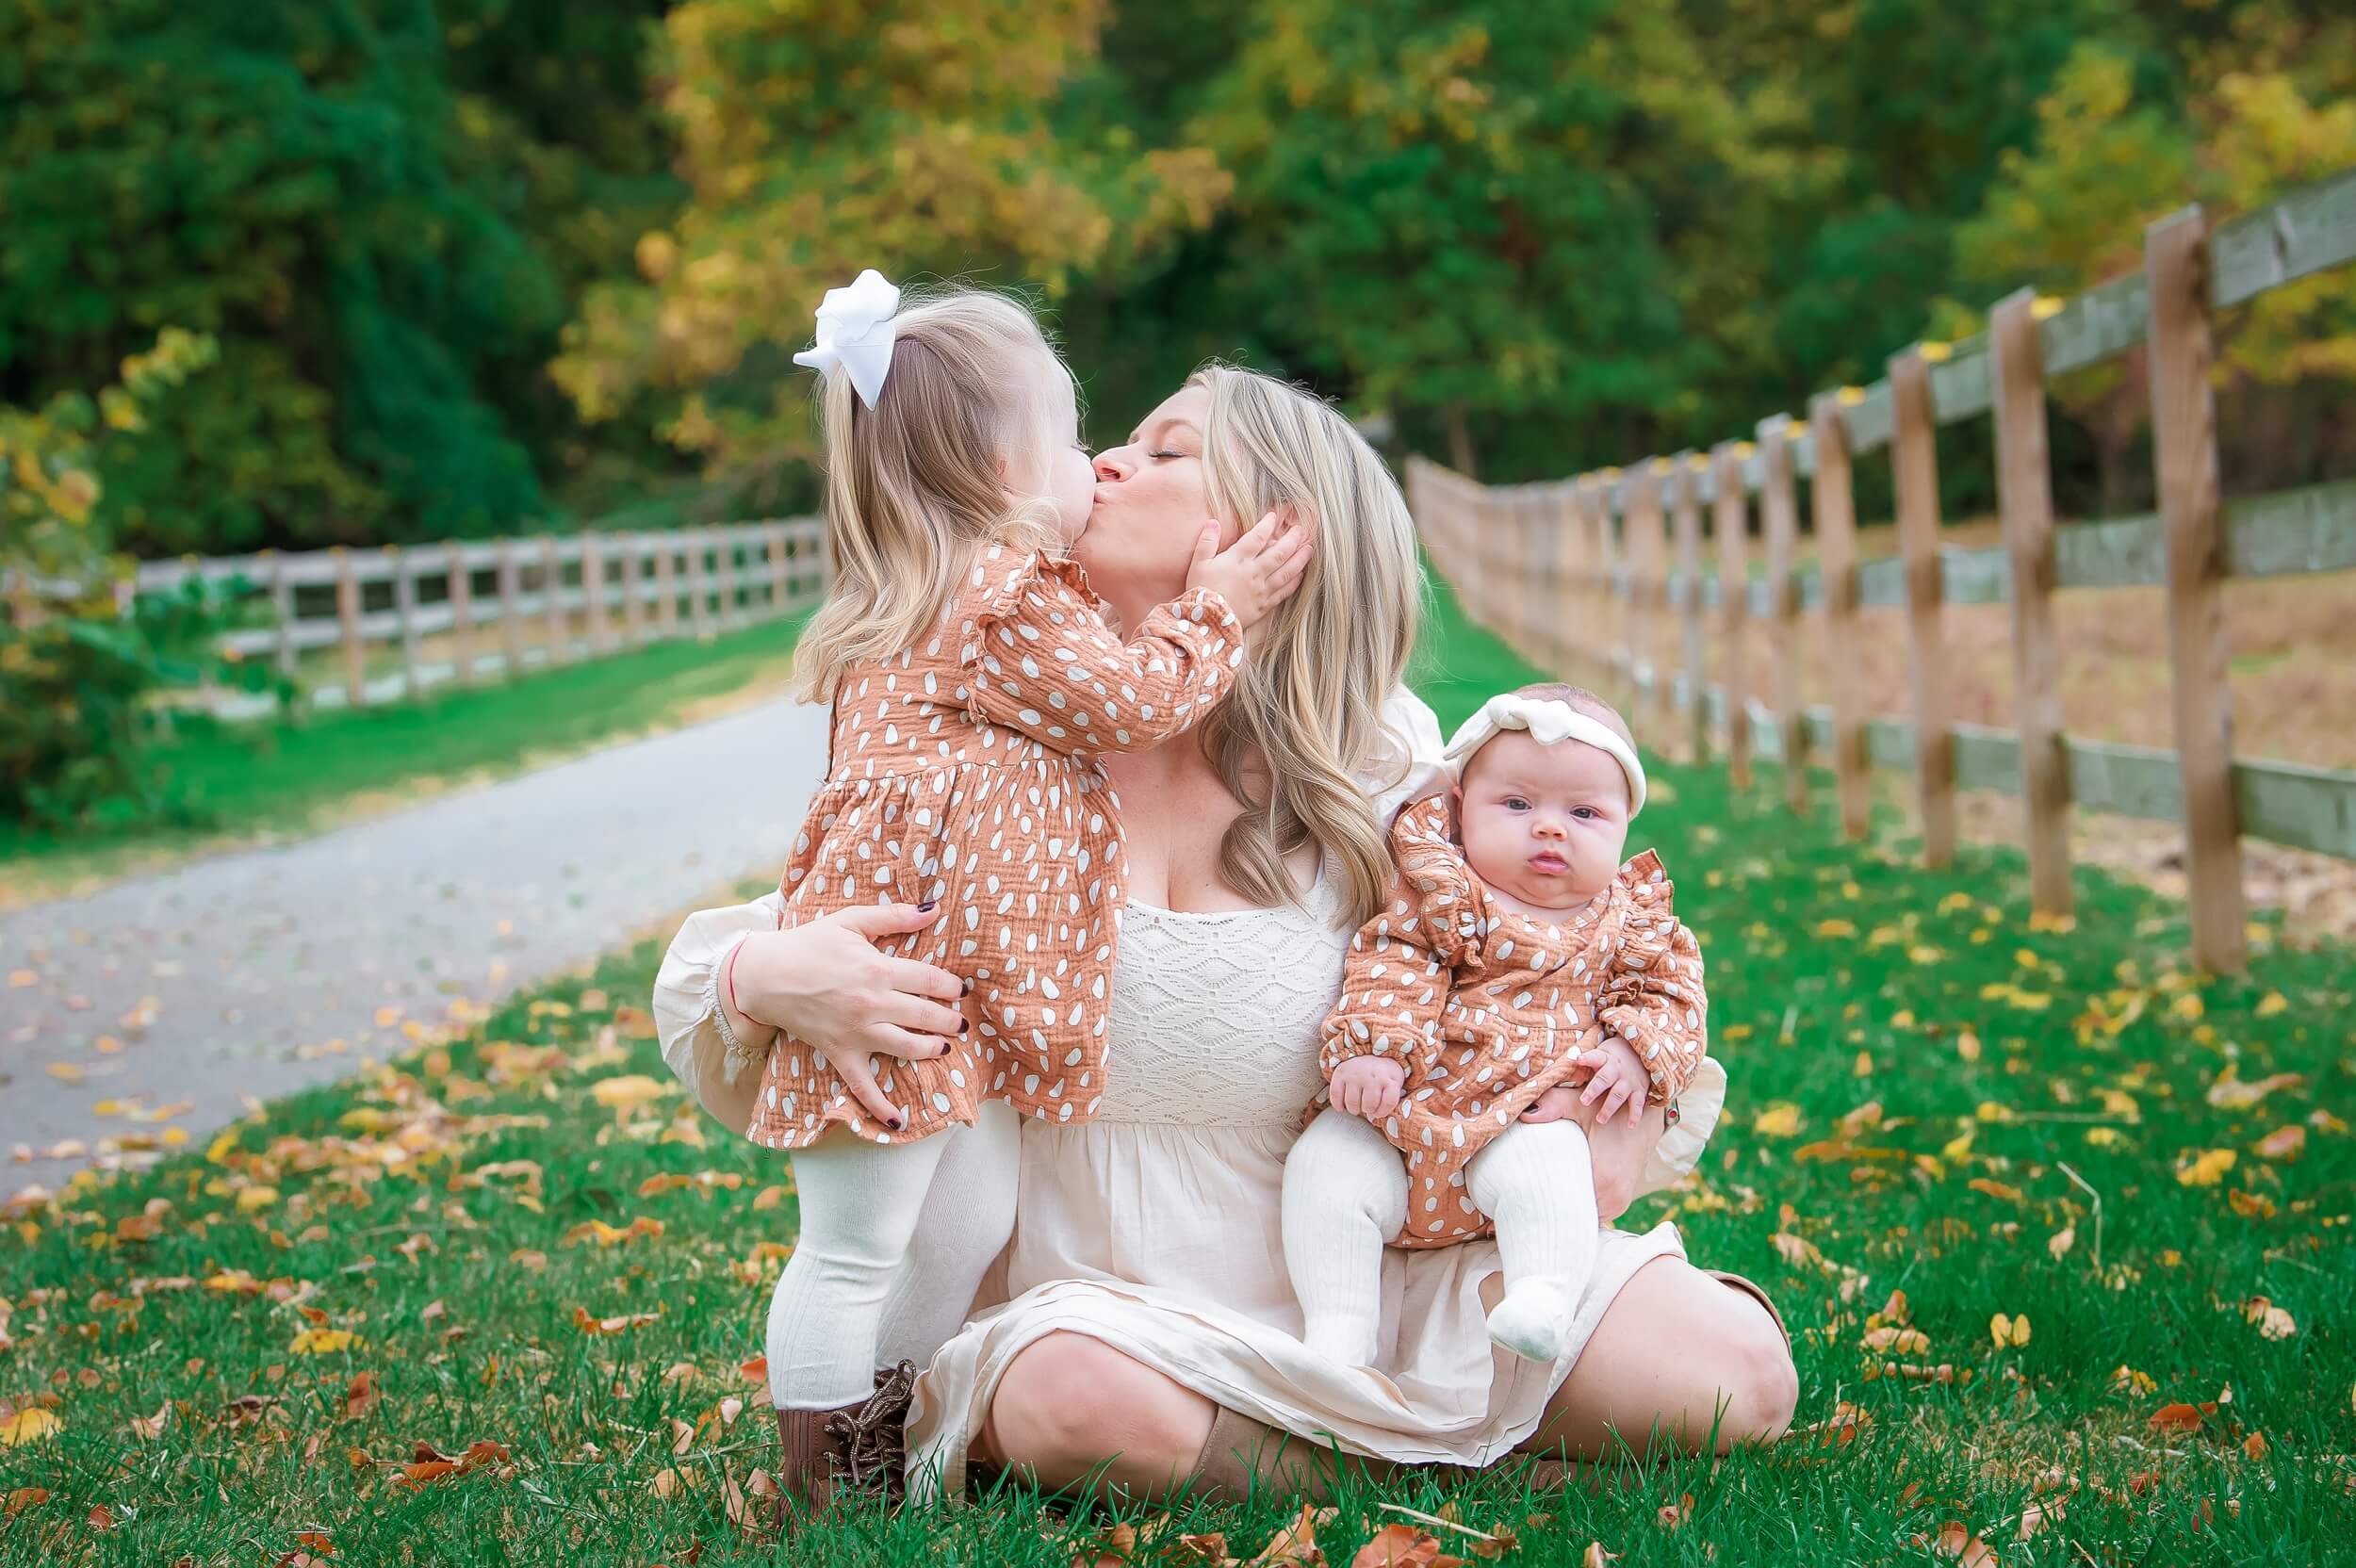 Family portrait photography by Maryland photographer Nina K, woman in cream dress with two young children, outdoor portraits